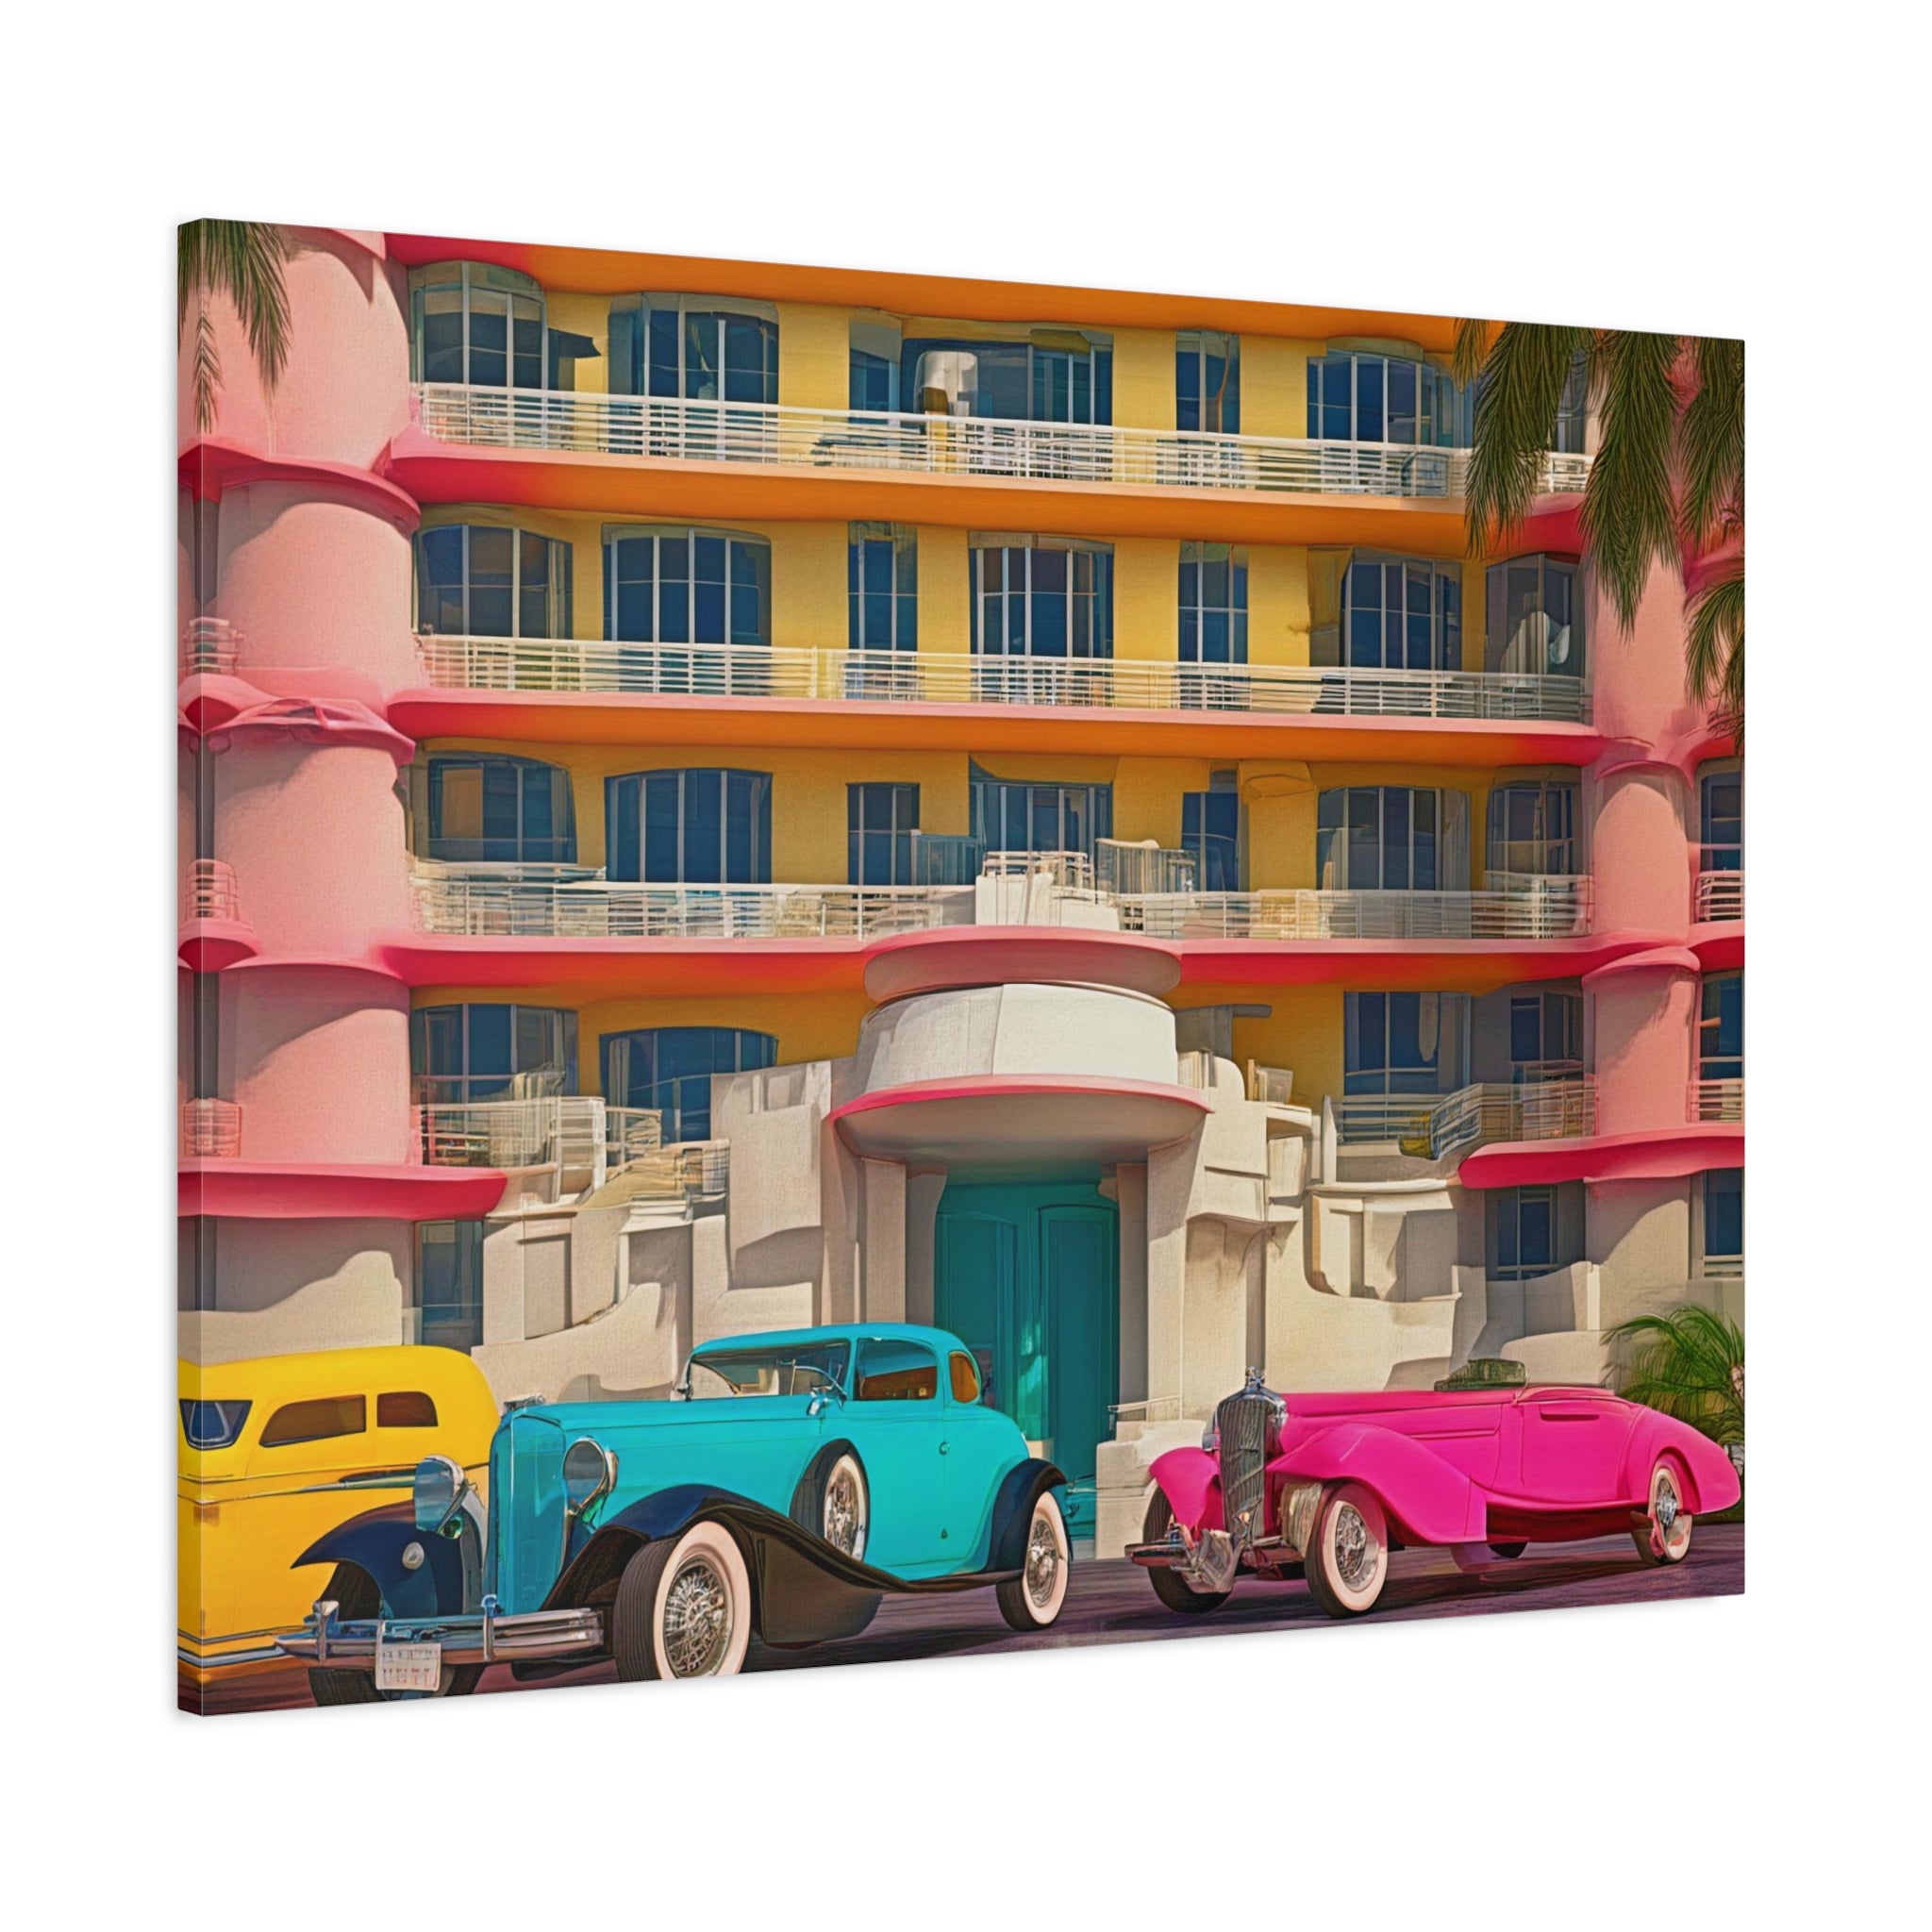 Wall Art I’lll BE RIGHT BACK Canvas Print Art Deco Painting Giclee 40X30 GW Love Beauty Design House Home Office Decor Gift Ready to Hang